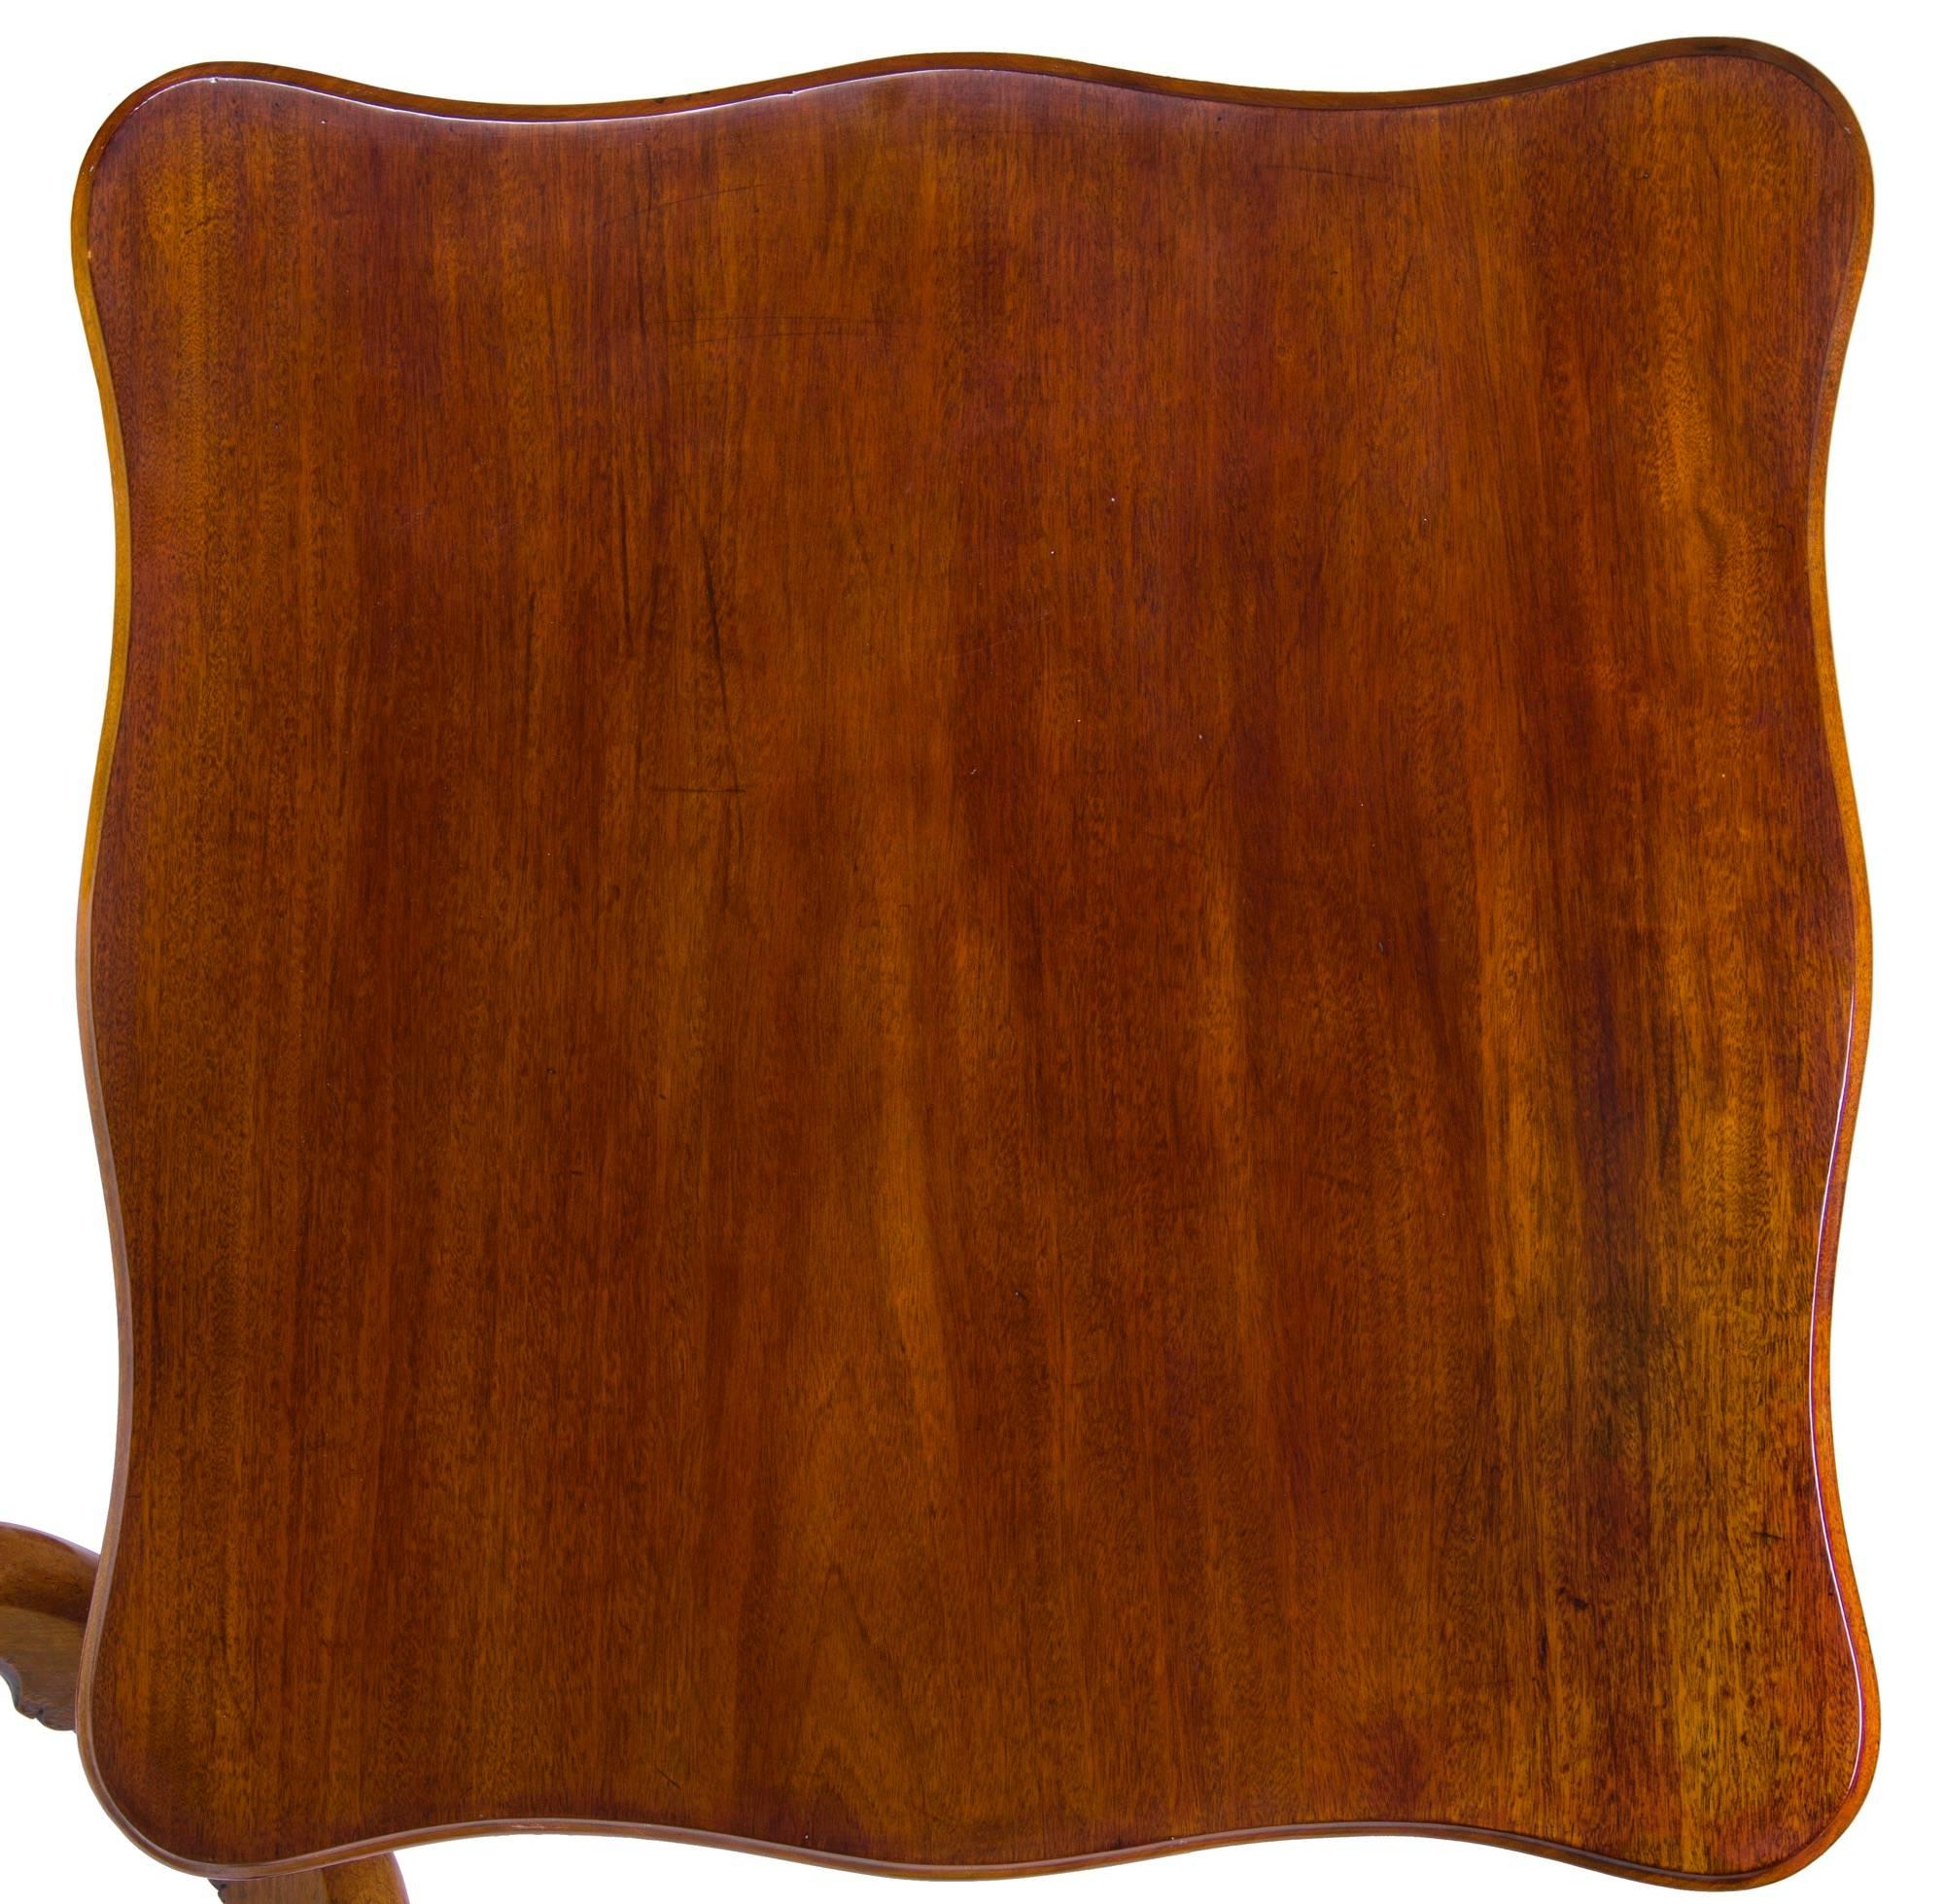 Colonial tilt-top tables, tended, as a rule, to be round. These were also produced in a square form, of which some, like this example, had serpentine edged 